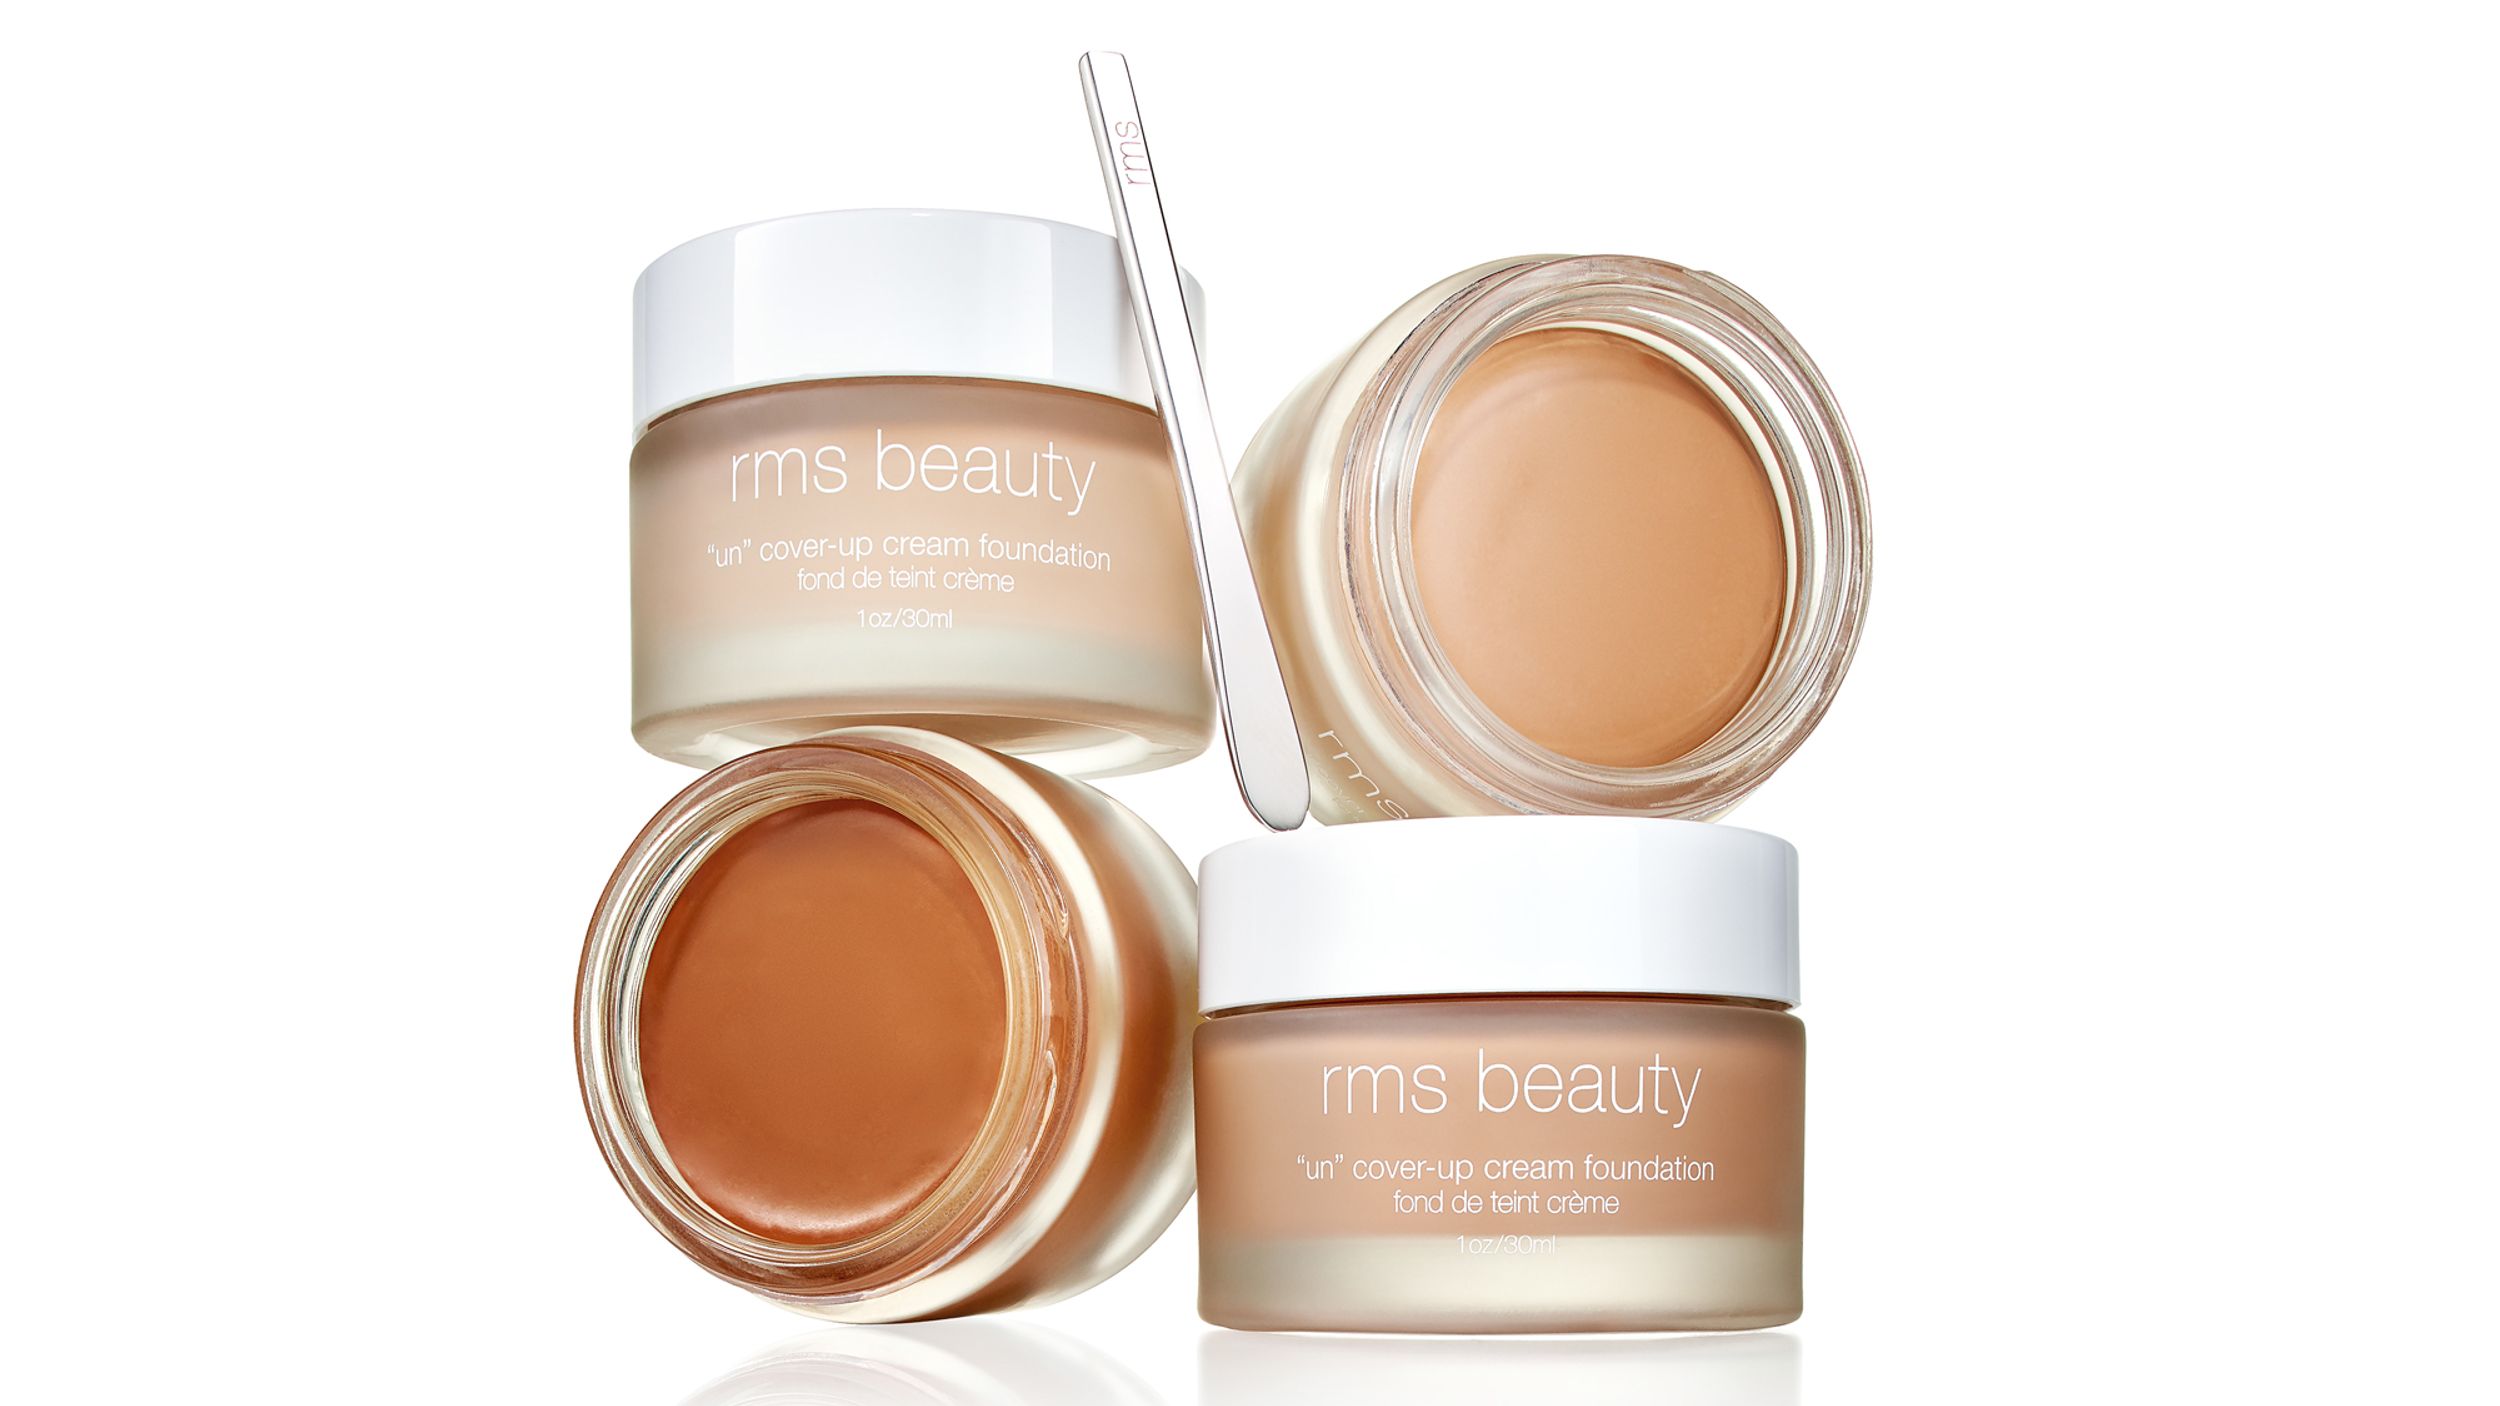 rms beauty launches un cover-up cream foundation